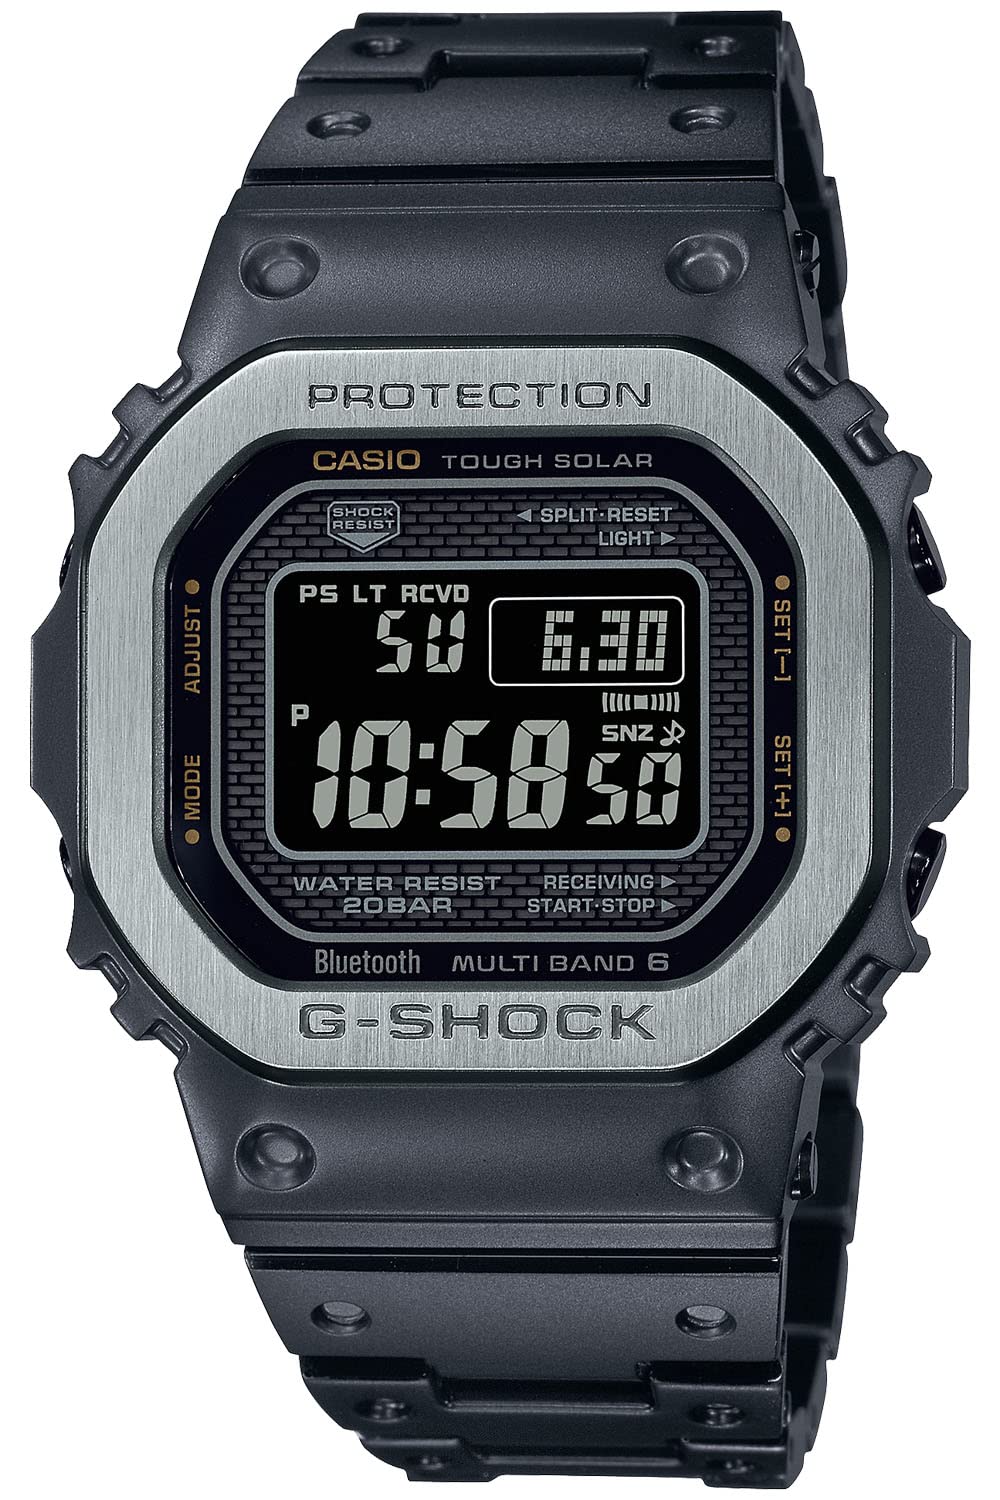 [Casio] G-Shock Watch [Domestic Genuine Product] Equipped with Bluetooth Full Metal Radio Solar Multi-finished Black GMW-B5000MB-1JF Men's Black - BanzaiHobby